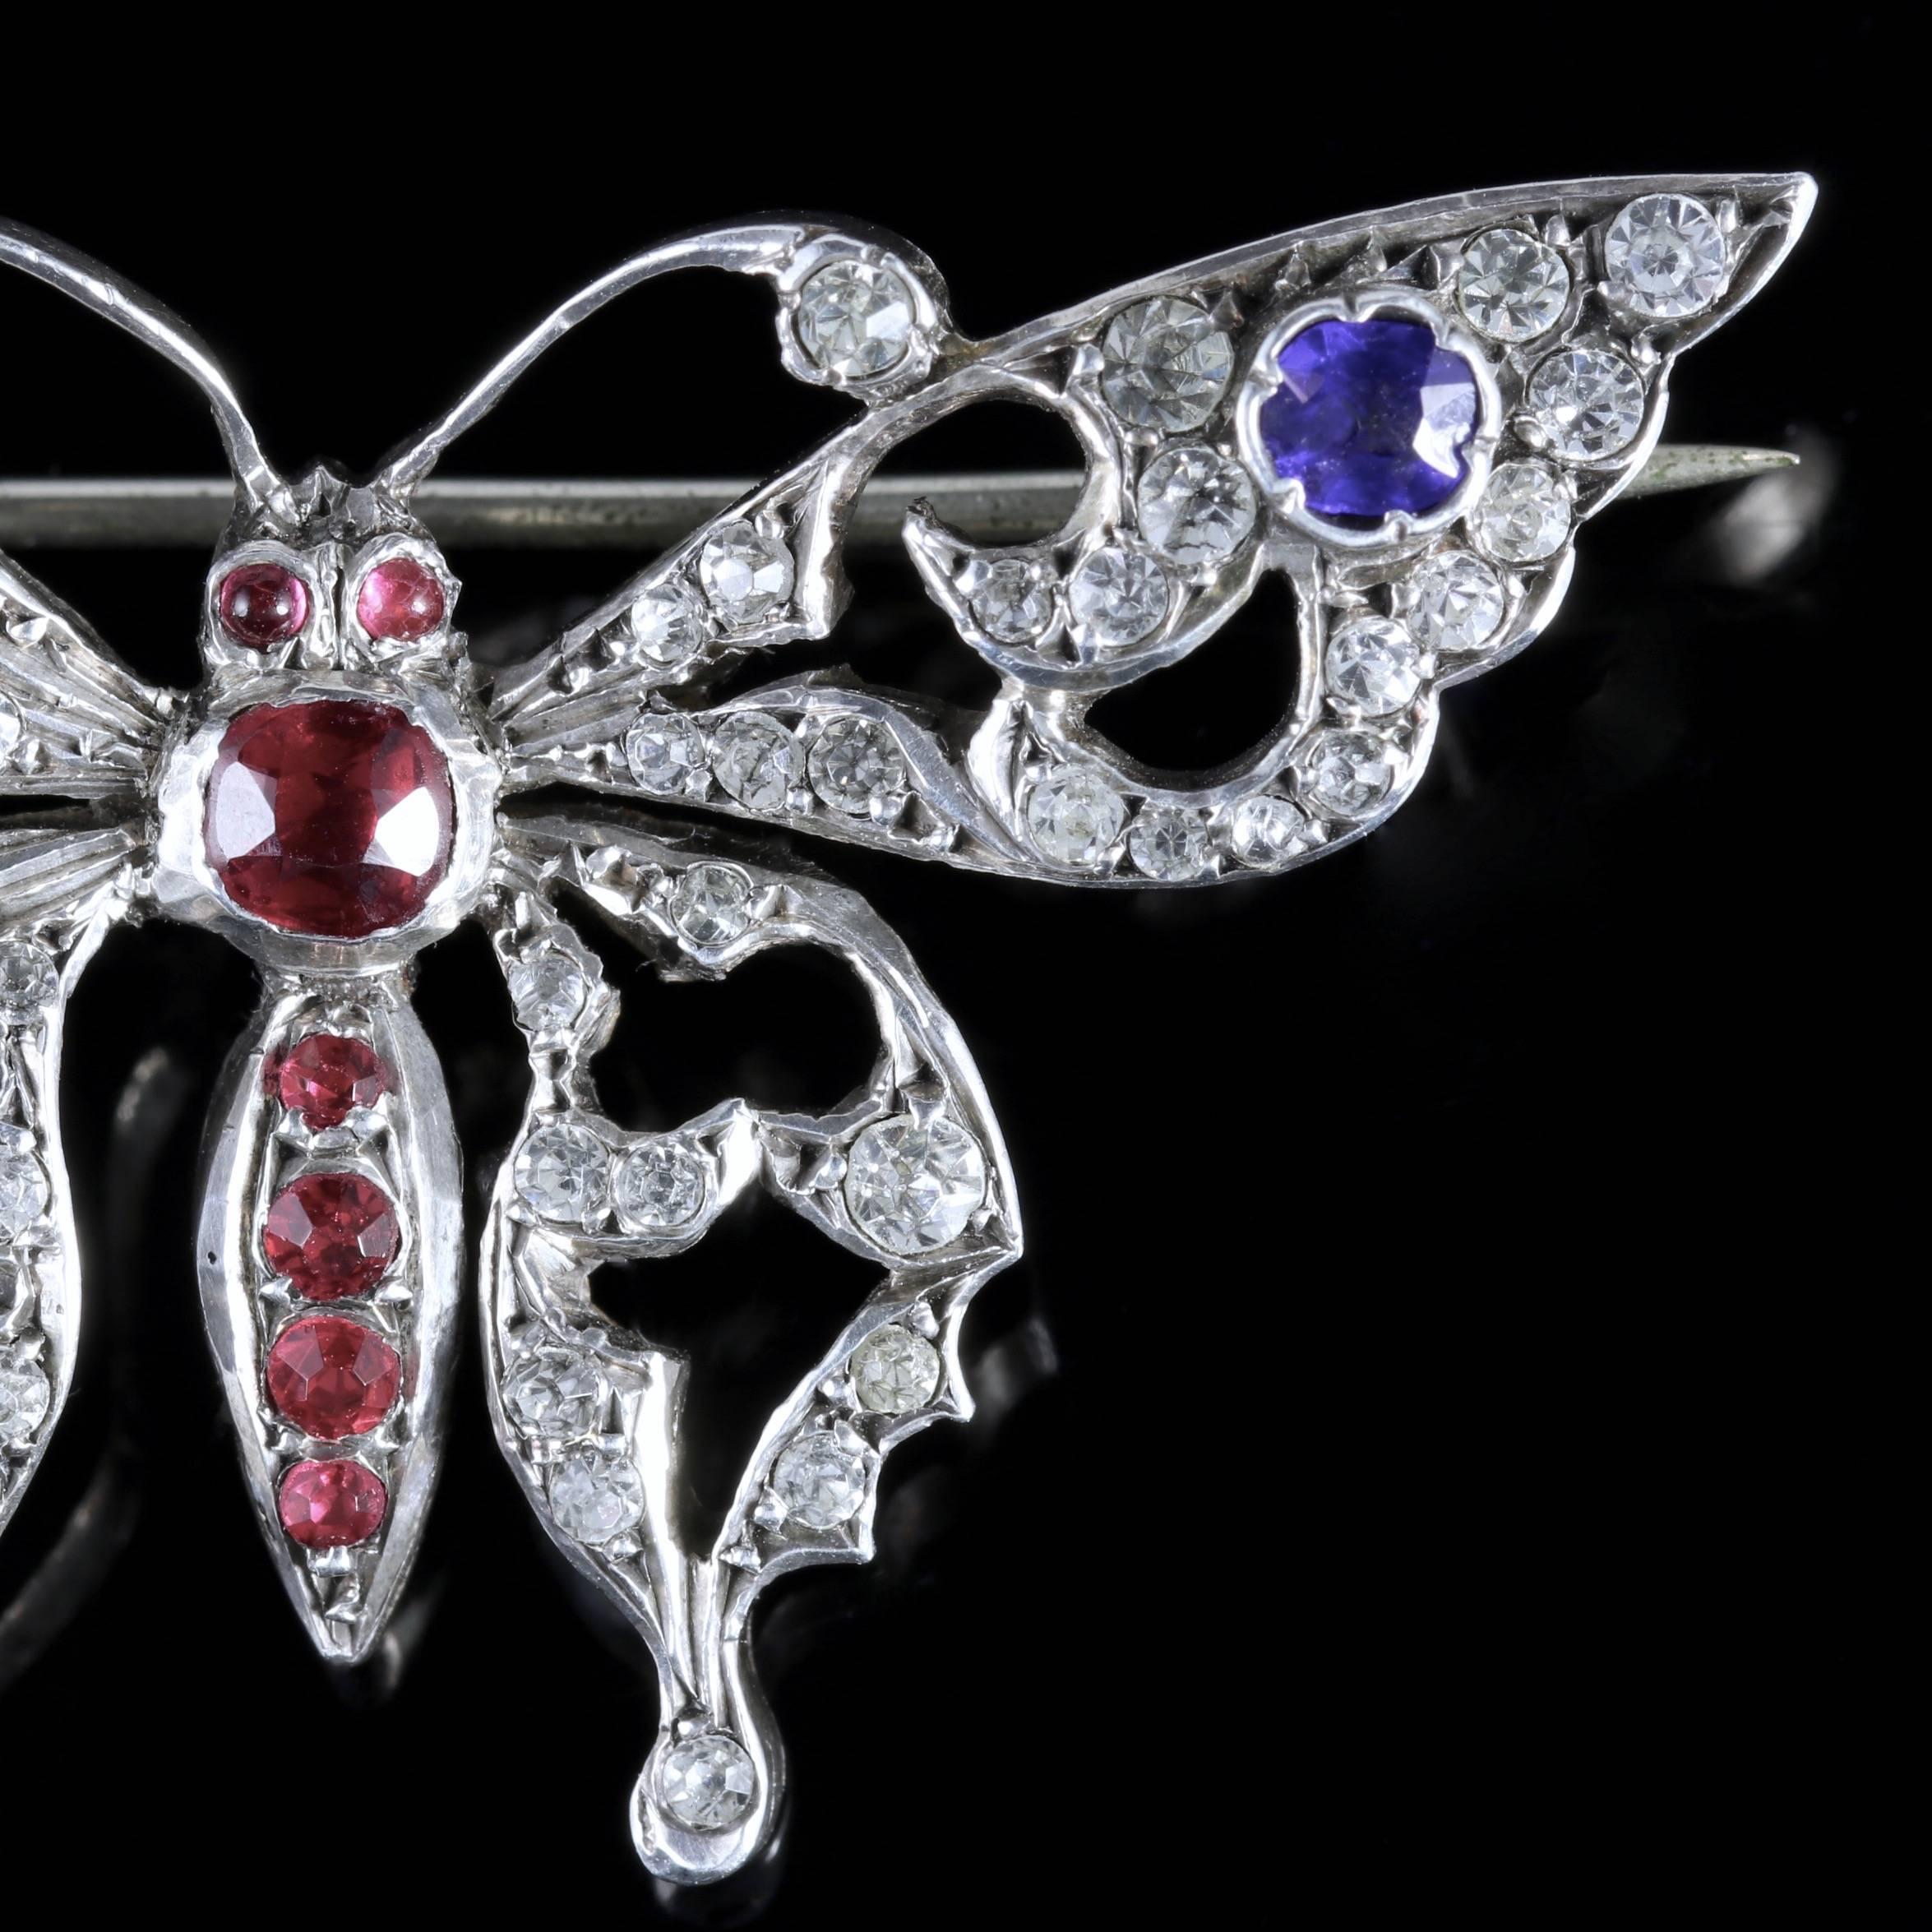 To read more please click continue reading below-

This wonderful antique French Sterling Silver Butterfly brooch is genuine Victorian Circa 1900. 

Butterfly or insect jewellery is highly collectable and was a symbol of good luck to the wearer